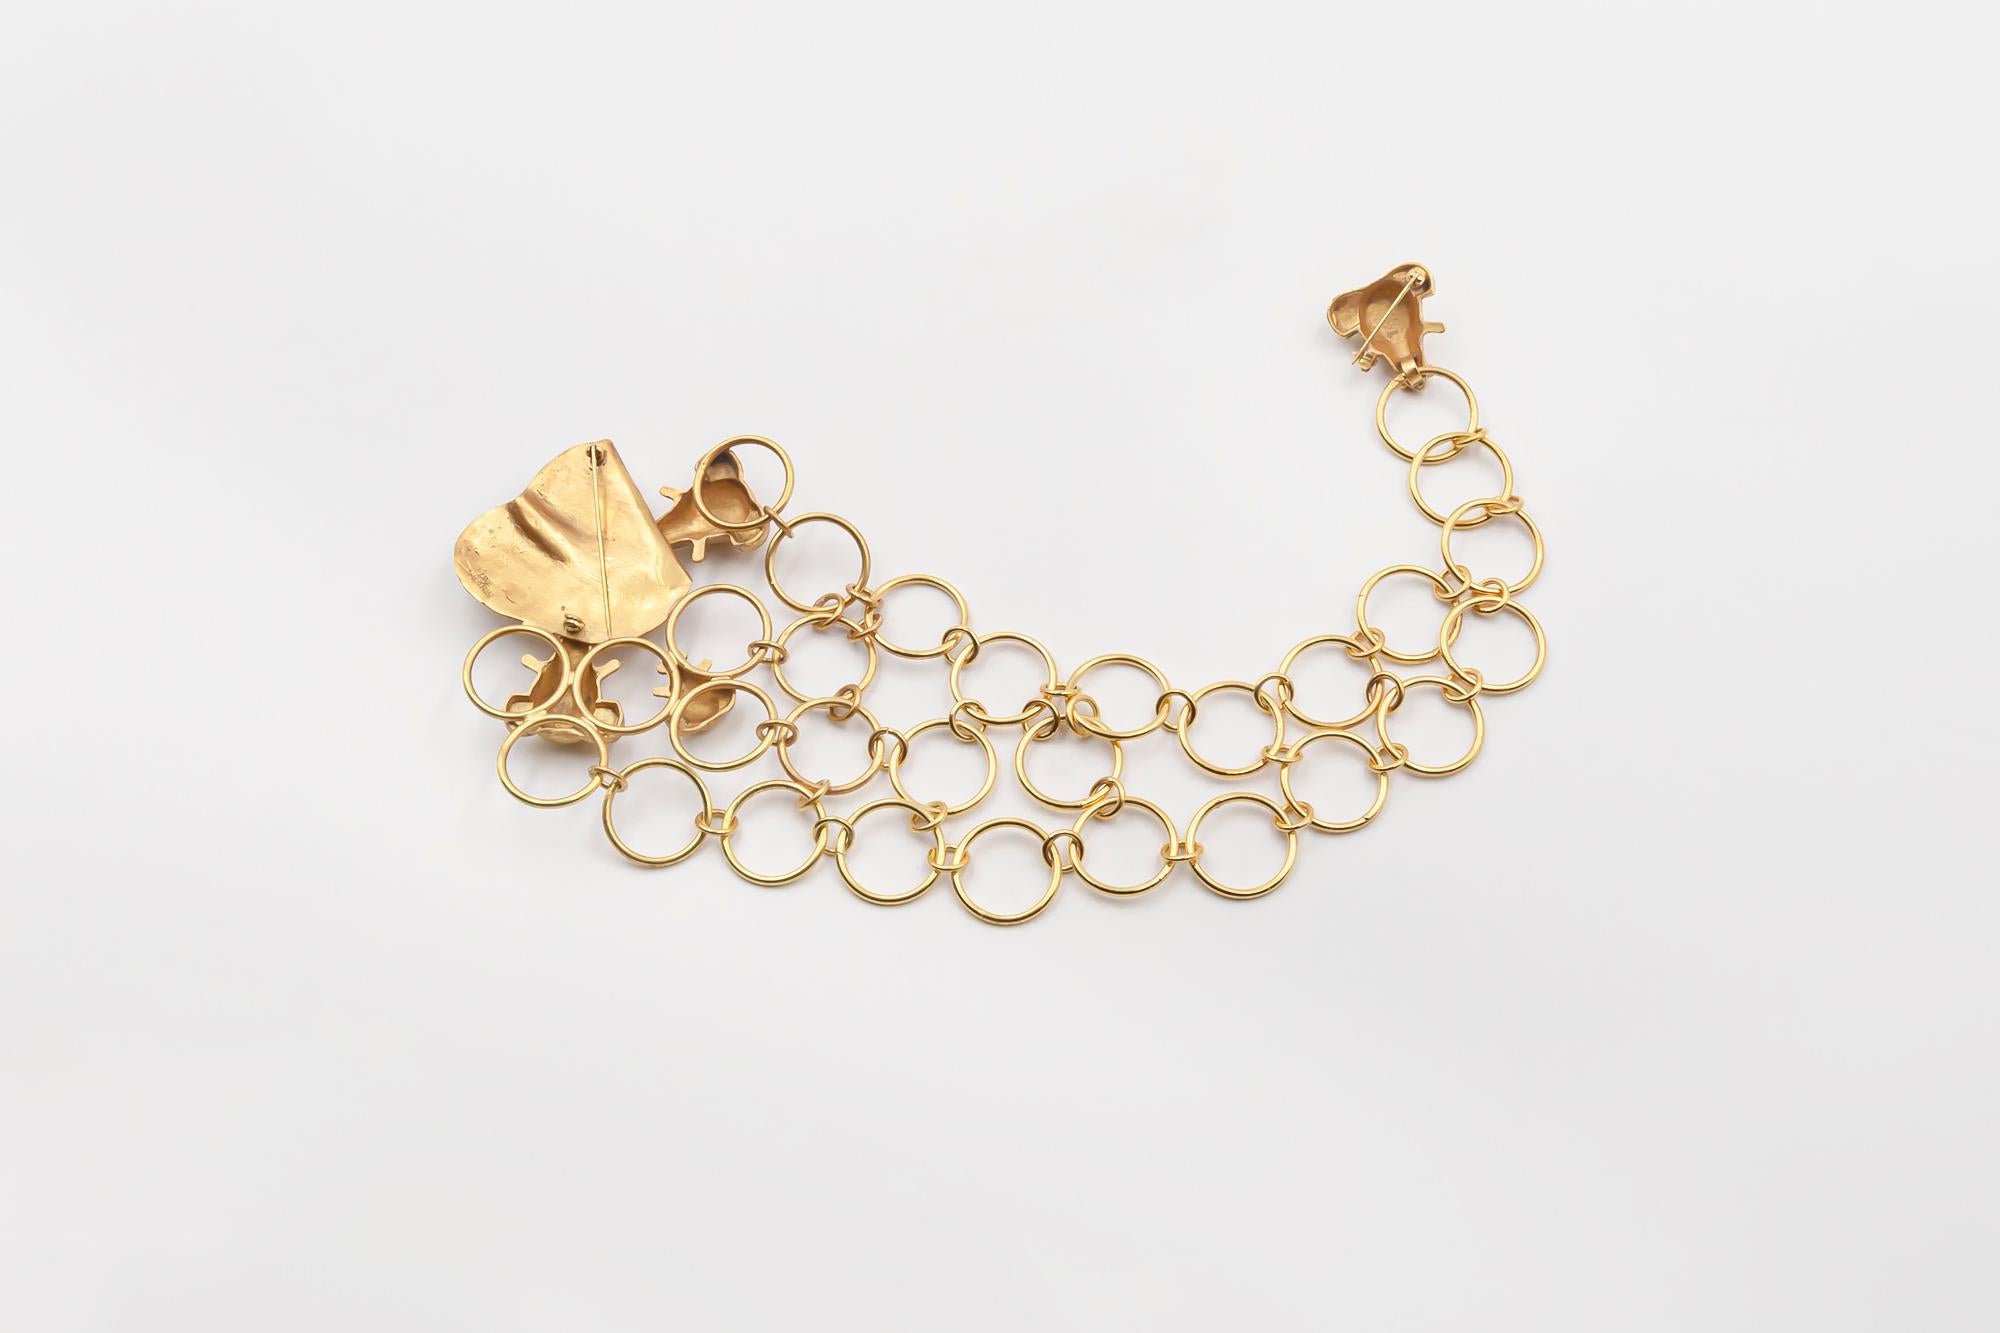 Very rare double pin brooch linked with 3 chains by French artist Line Vautrin.

Line Vautrin was a French jewelry maker, designer, and decorative artist. Best known for her uncategorizable manufacture of objects and jewelry, Vautrin’s practice